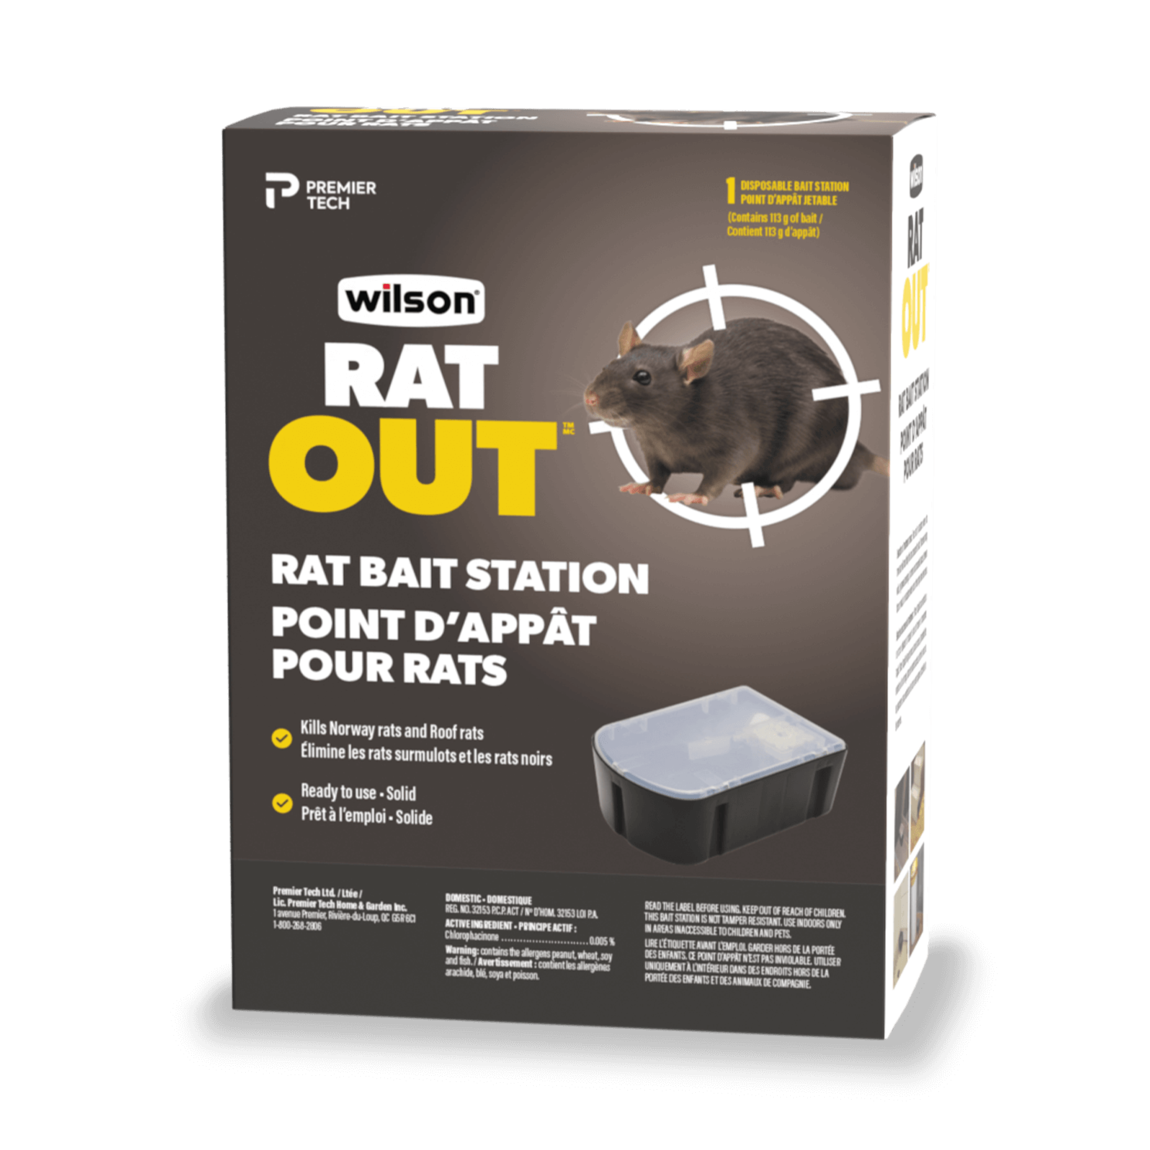 Mouse Traps Vs Bait Stations: What's The Difference?